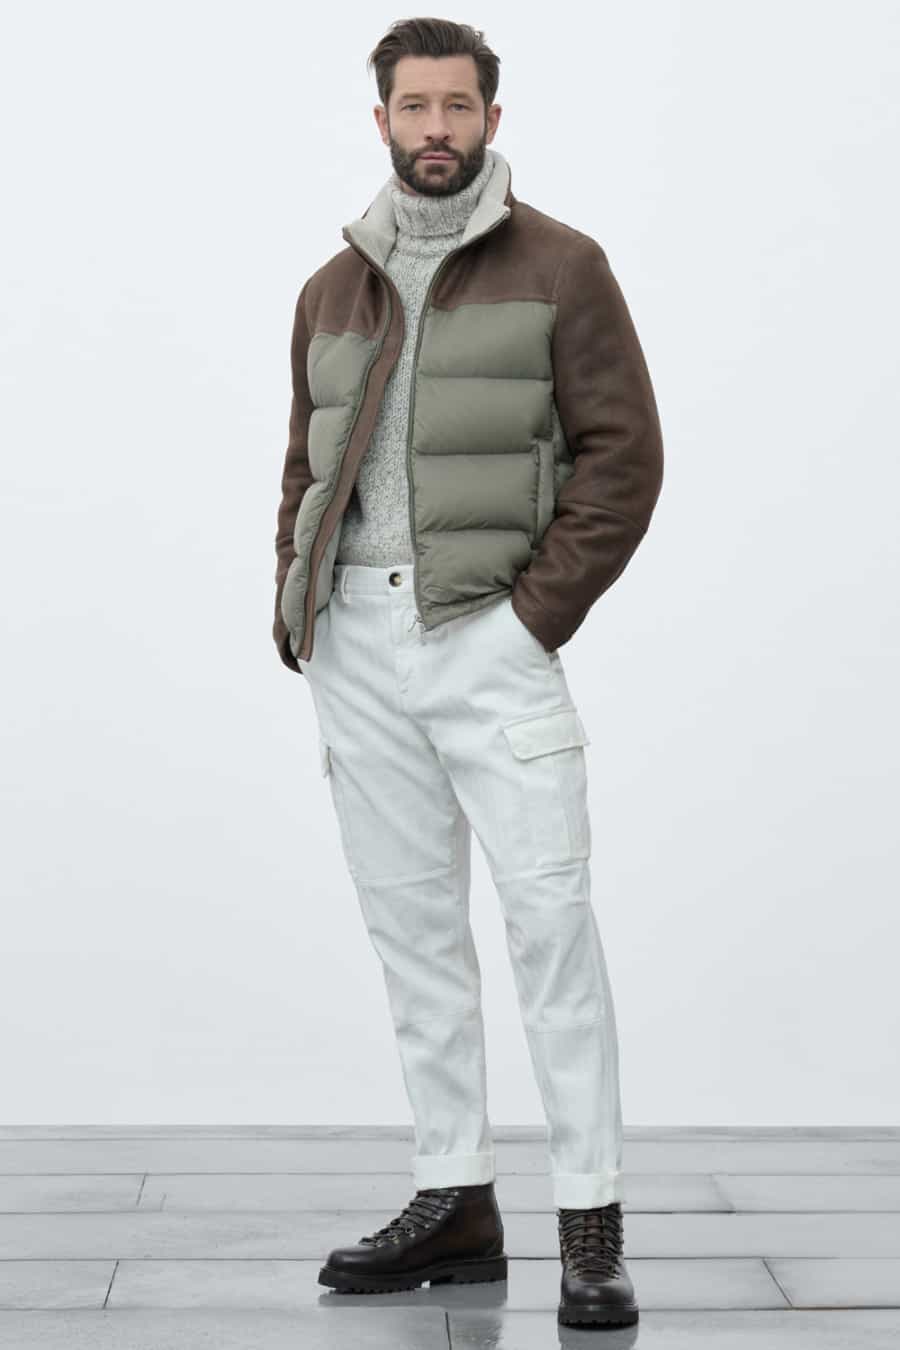 Men's white cargo pants, light grey roll neck jumper, puffer jacket and leather hiking boots outfit